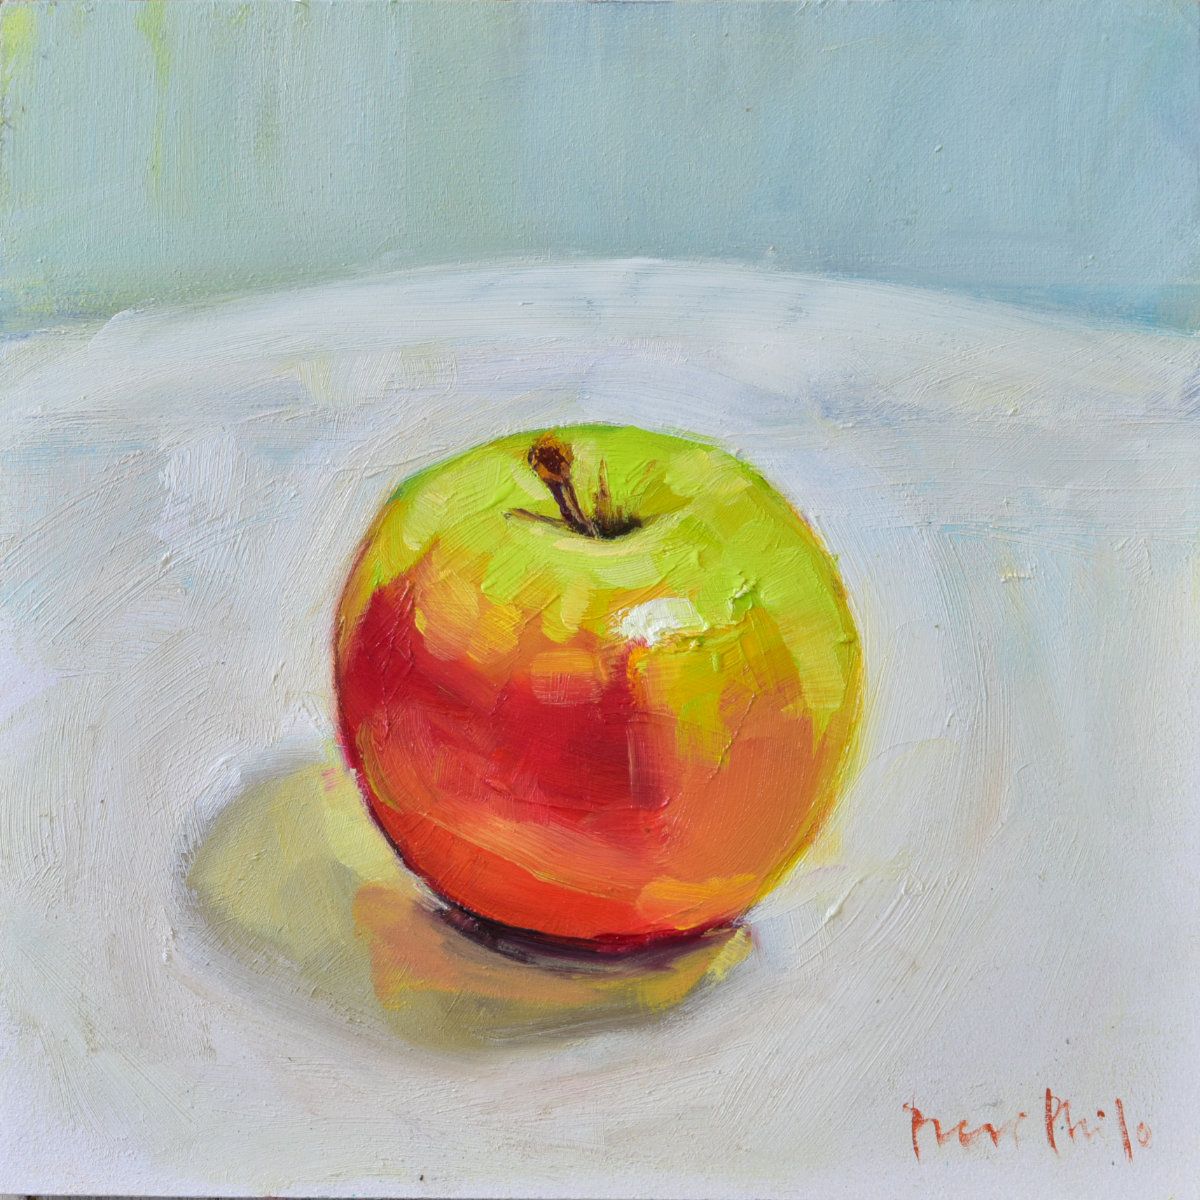 Apple by Piers Philo